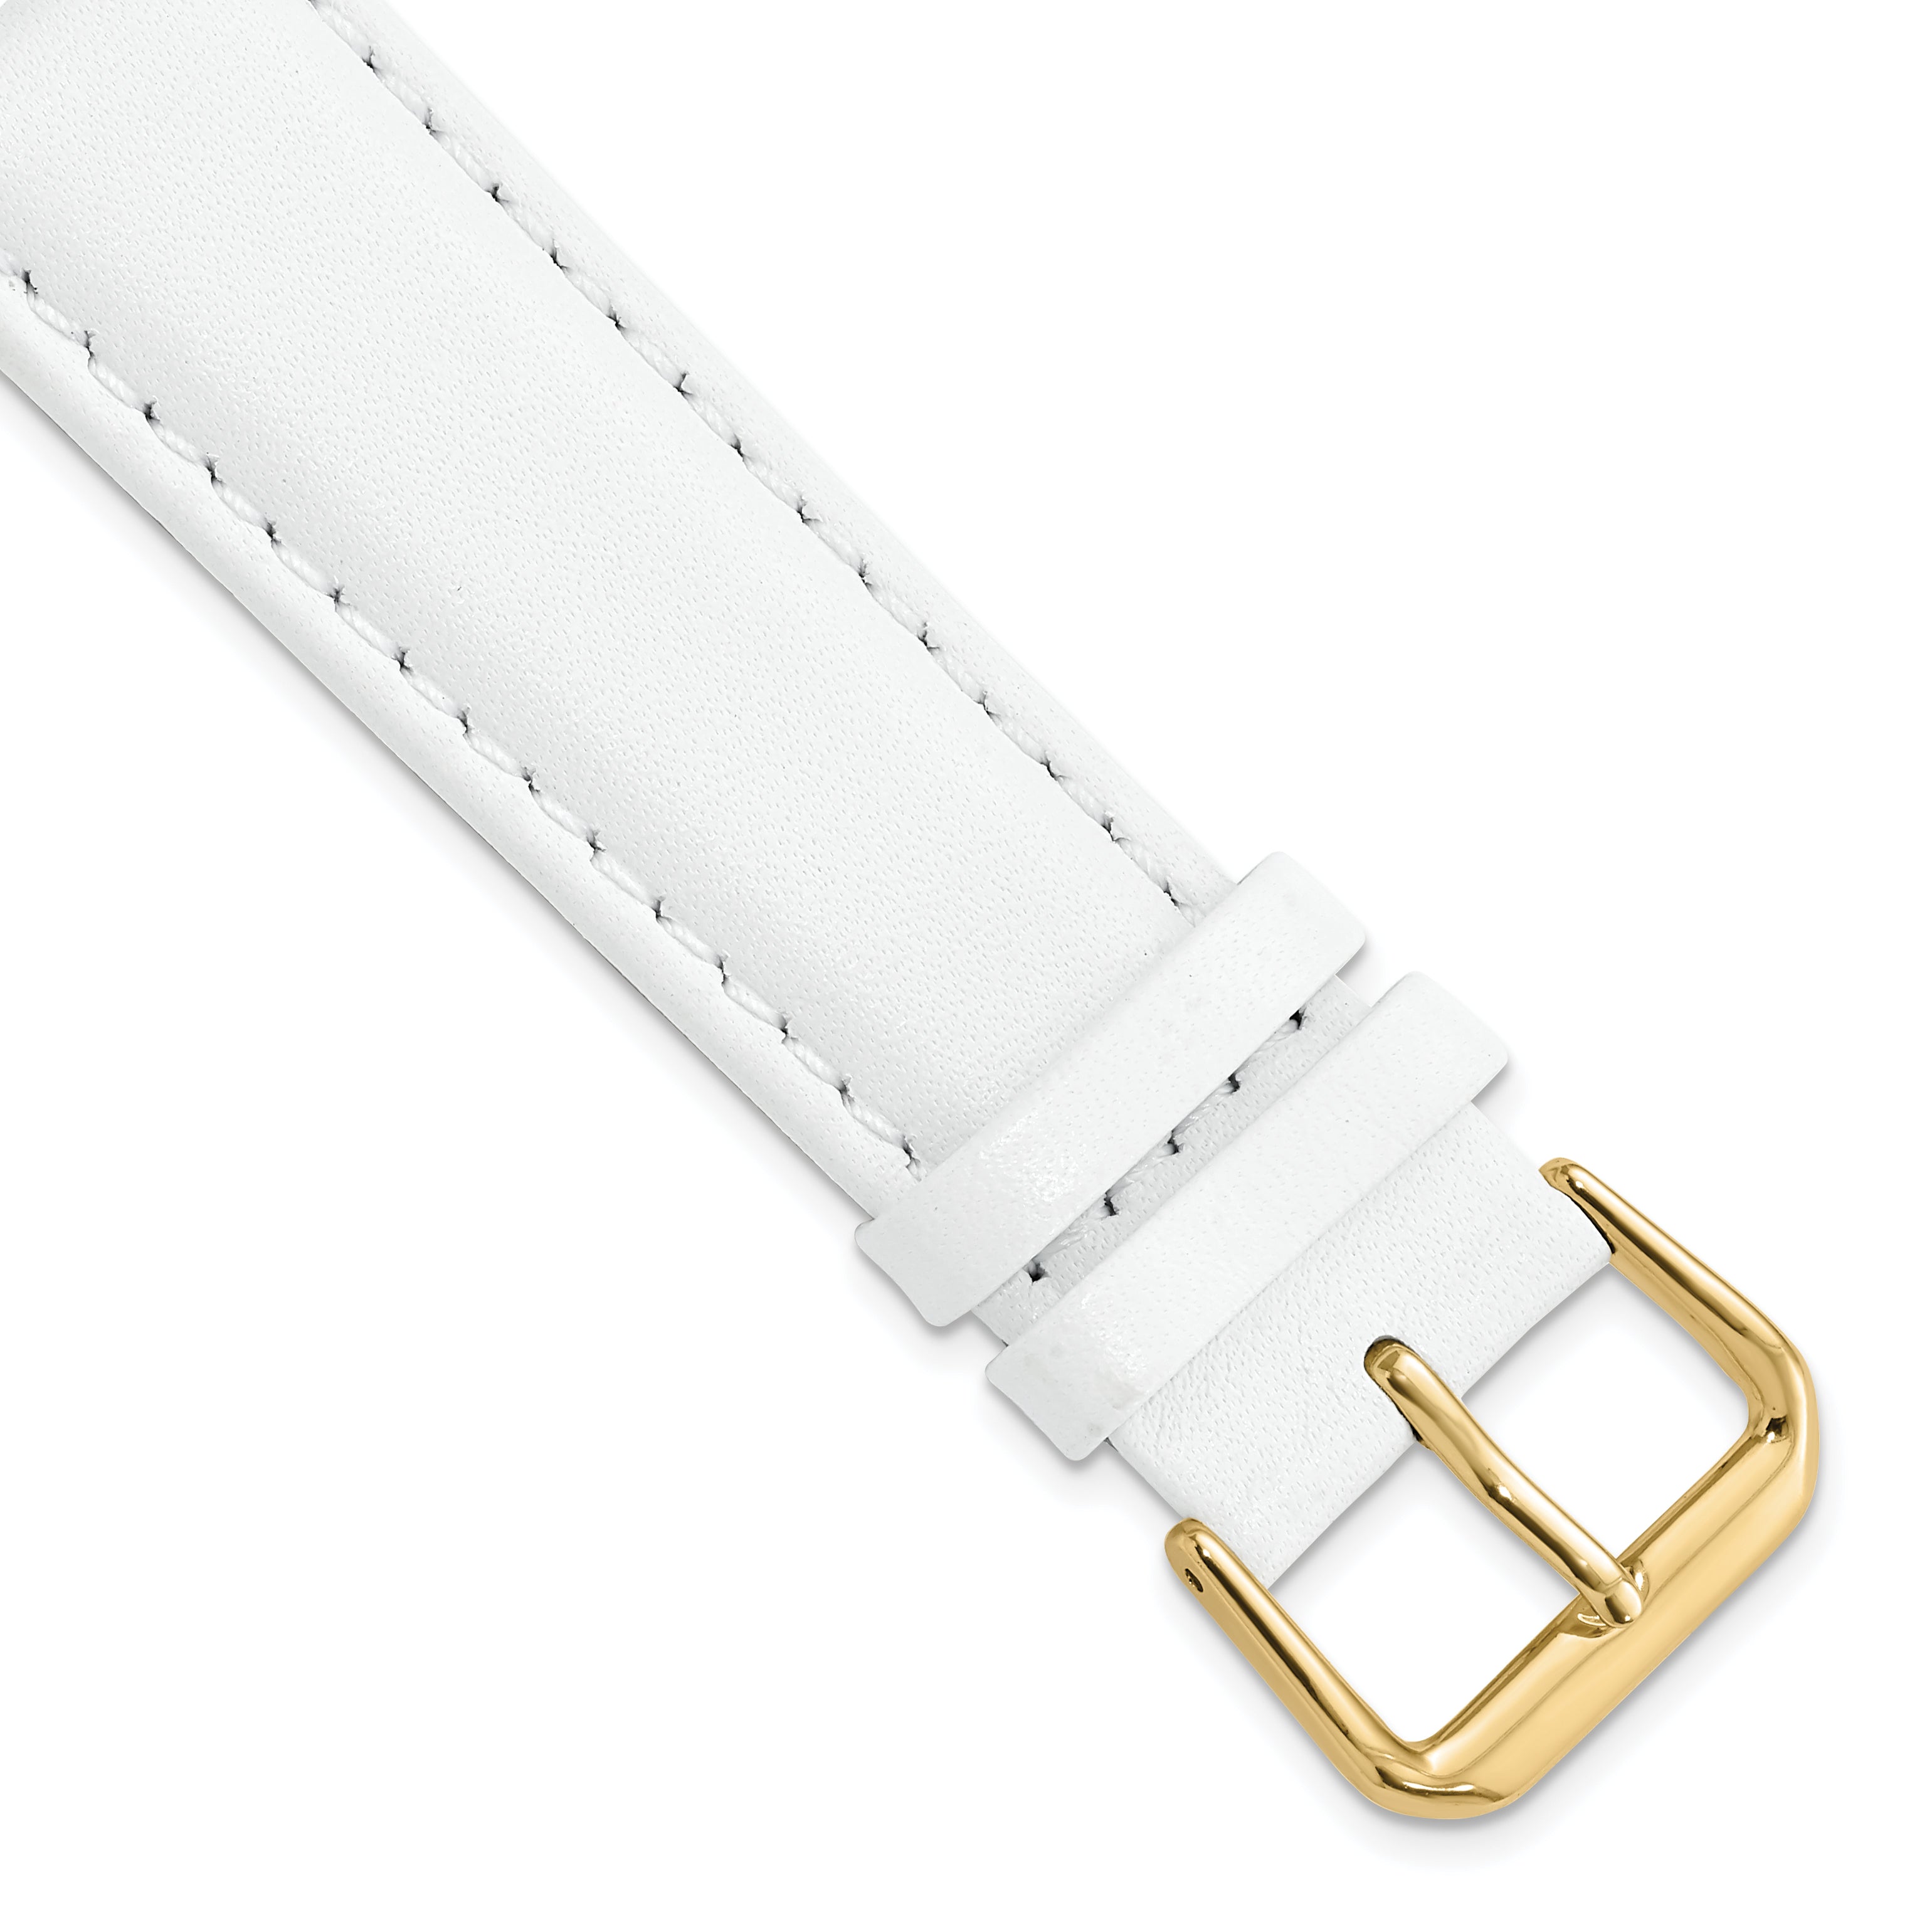 DeBeer 20mm White Smooth Leather with Gold-tone Buckle 7.5 inch Watch Band